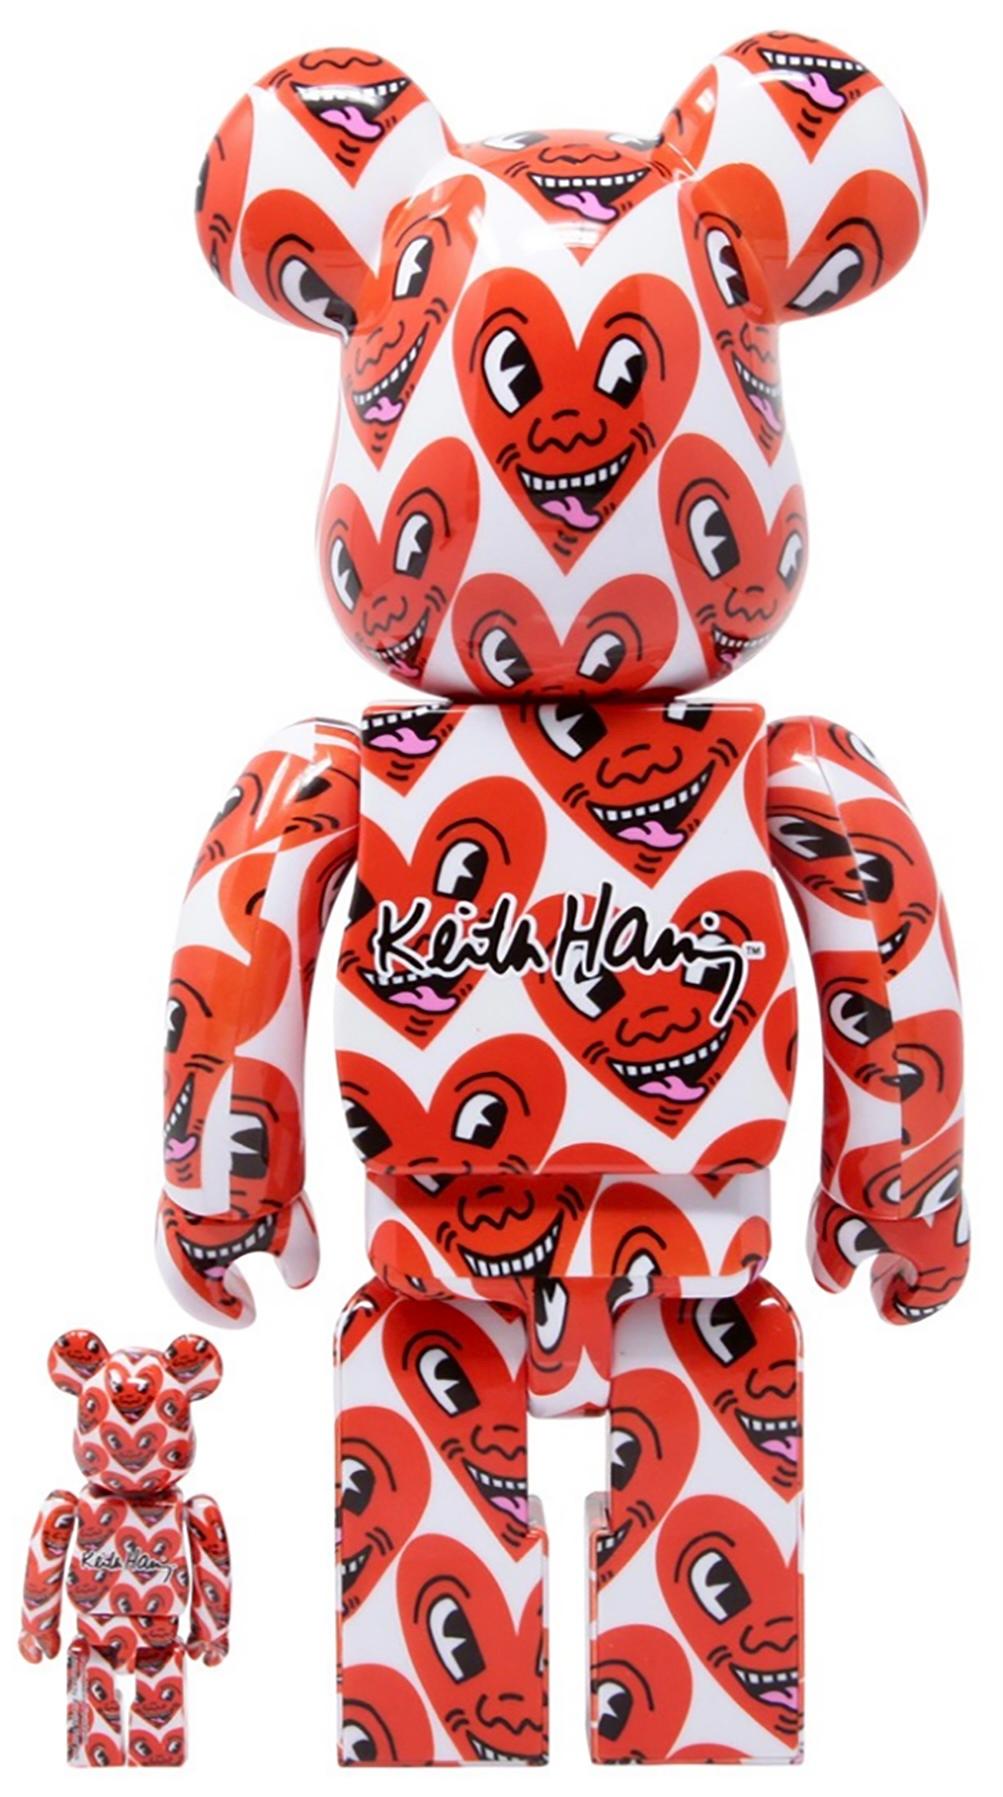 Keith Haring Bearbrick 400 % Figur (Haring BE@RBRICK) – Sculpture von (after) Keith Haring